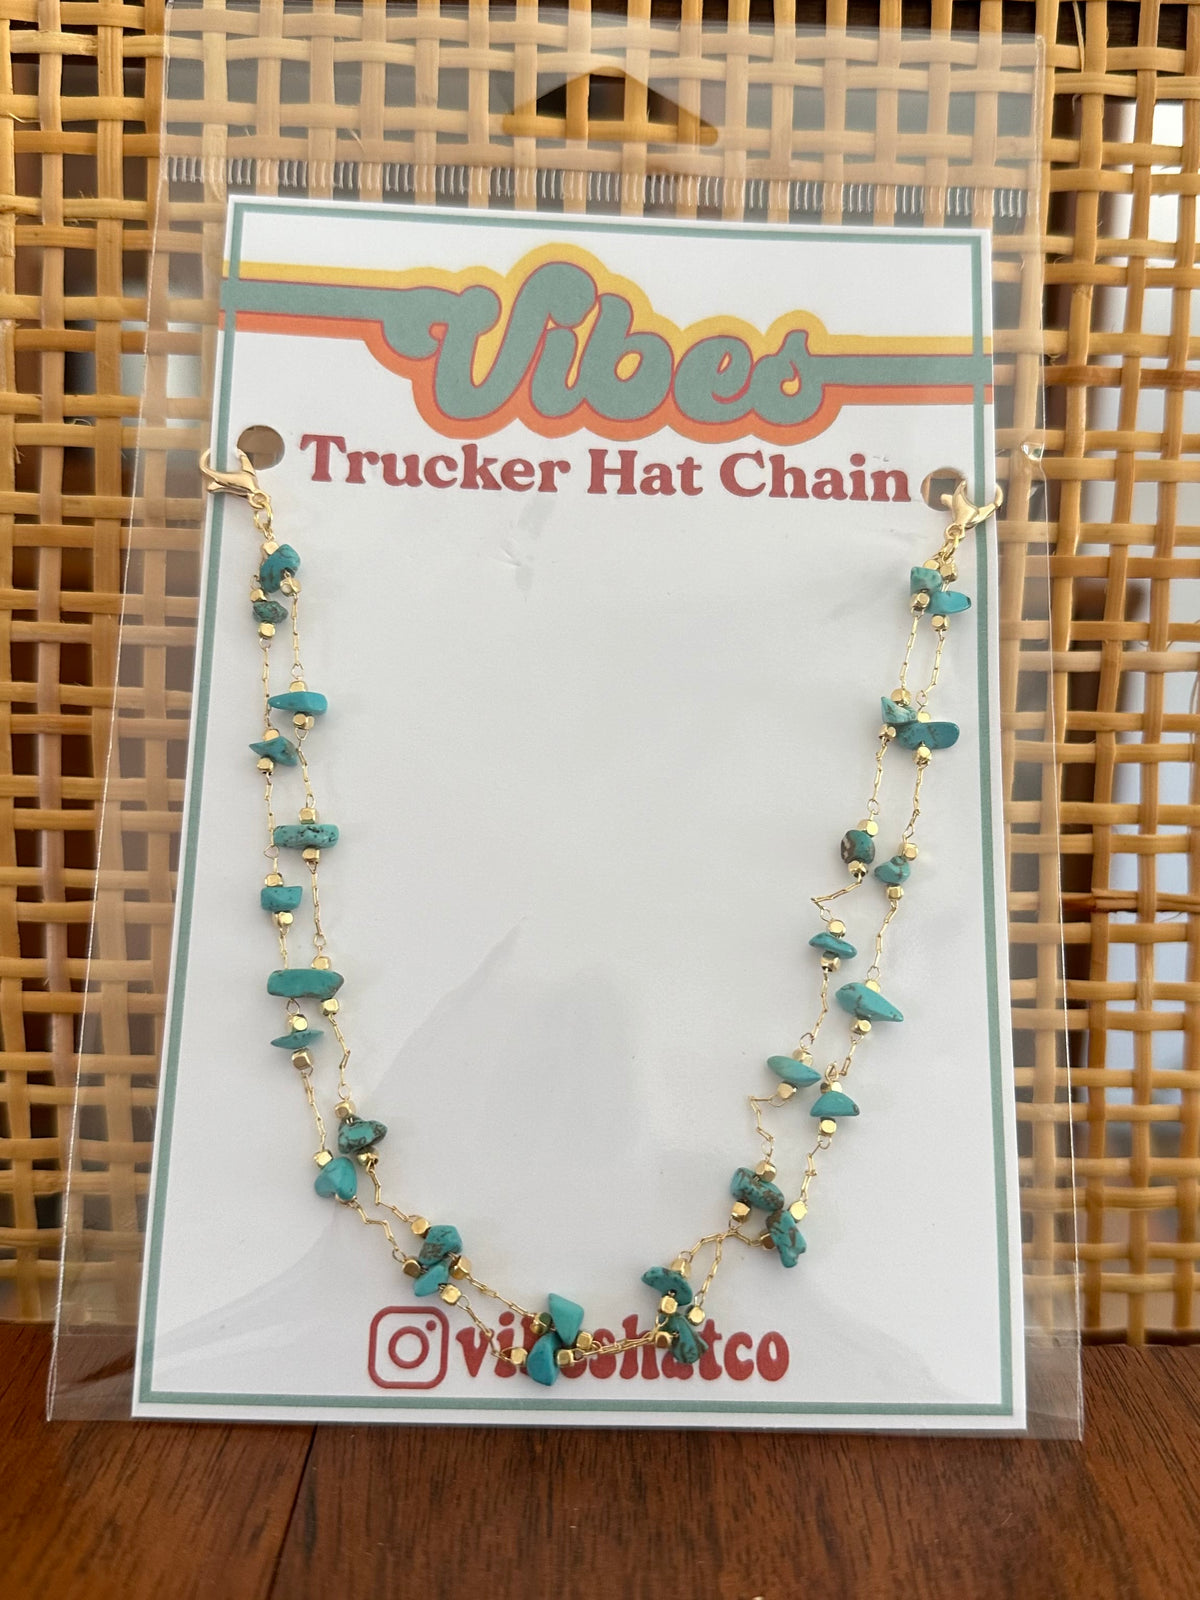 Gold Trucker Chains | Hat Chains - By Haute Sheet